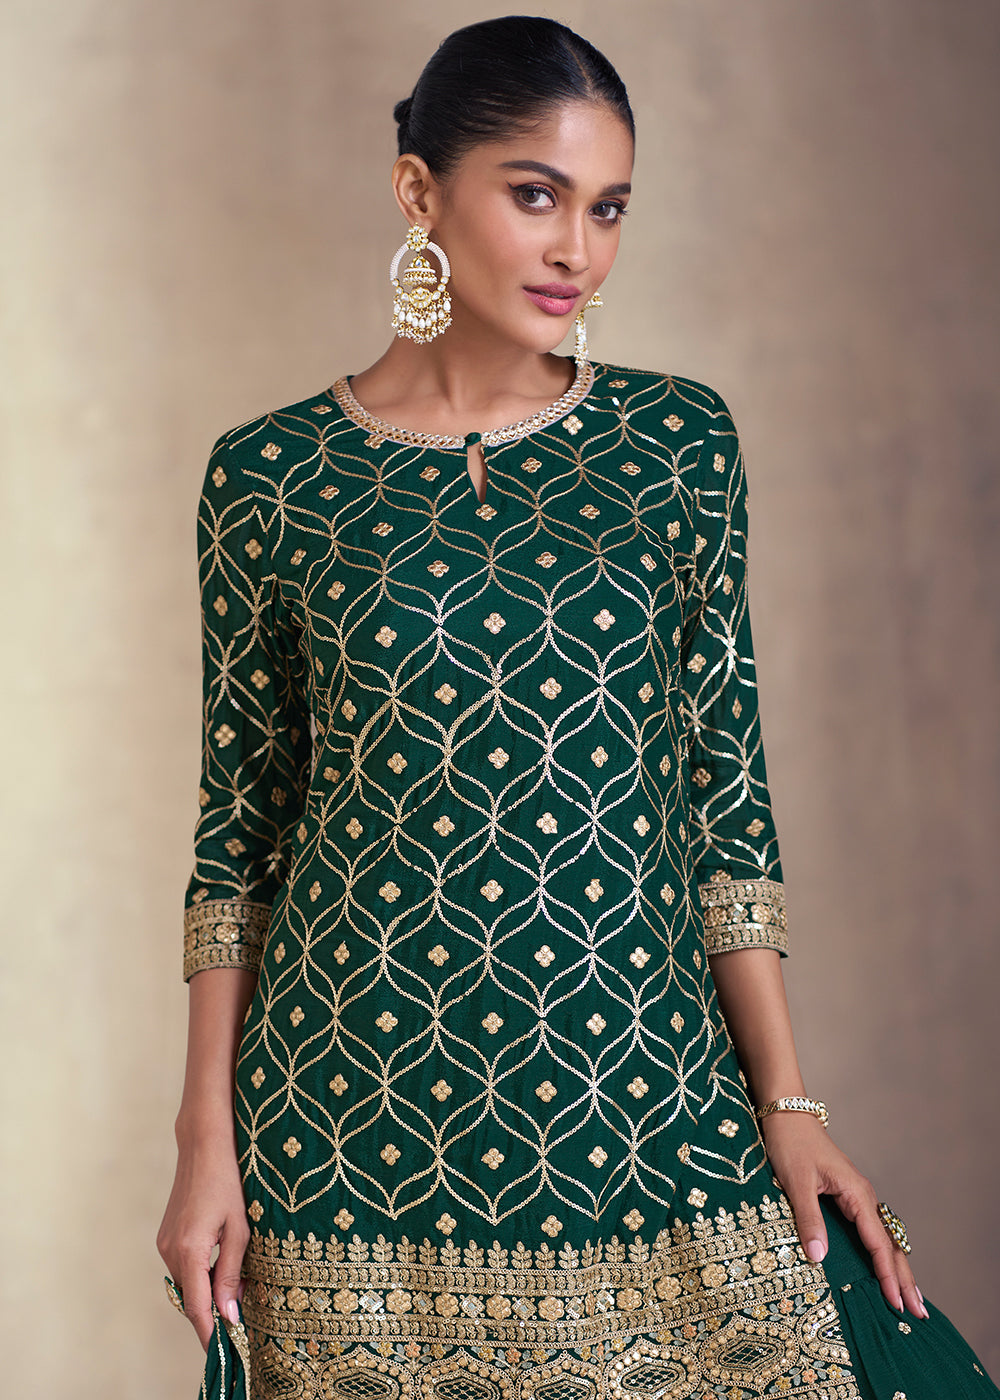 Shop Now Bottle Green Embroidered Festive Sharara Style Suit Online at Empress Clothing in USA, UK, Canada, Italy & Worldwide.